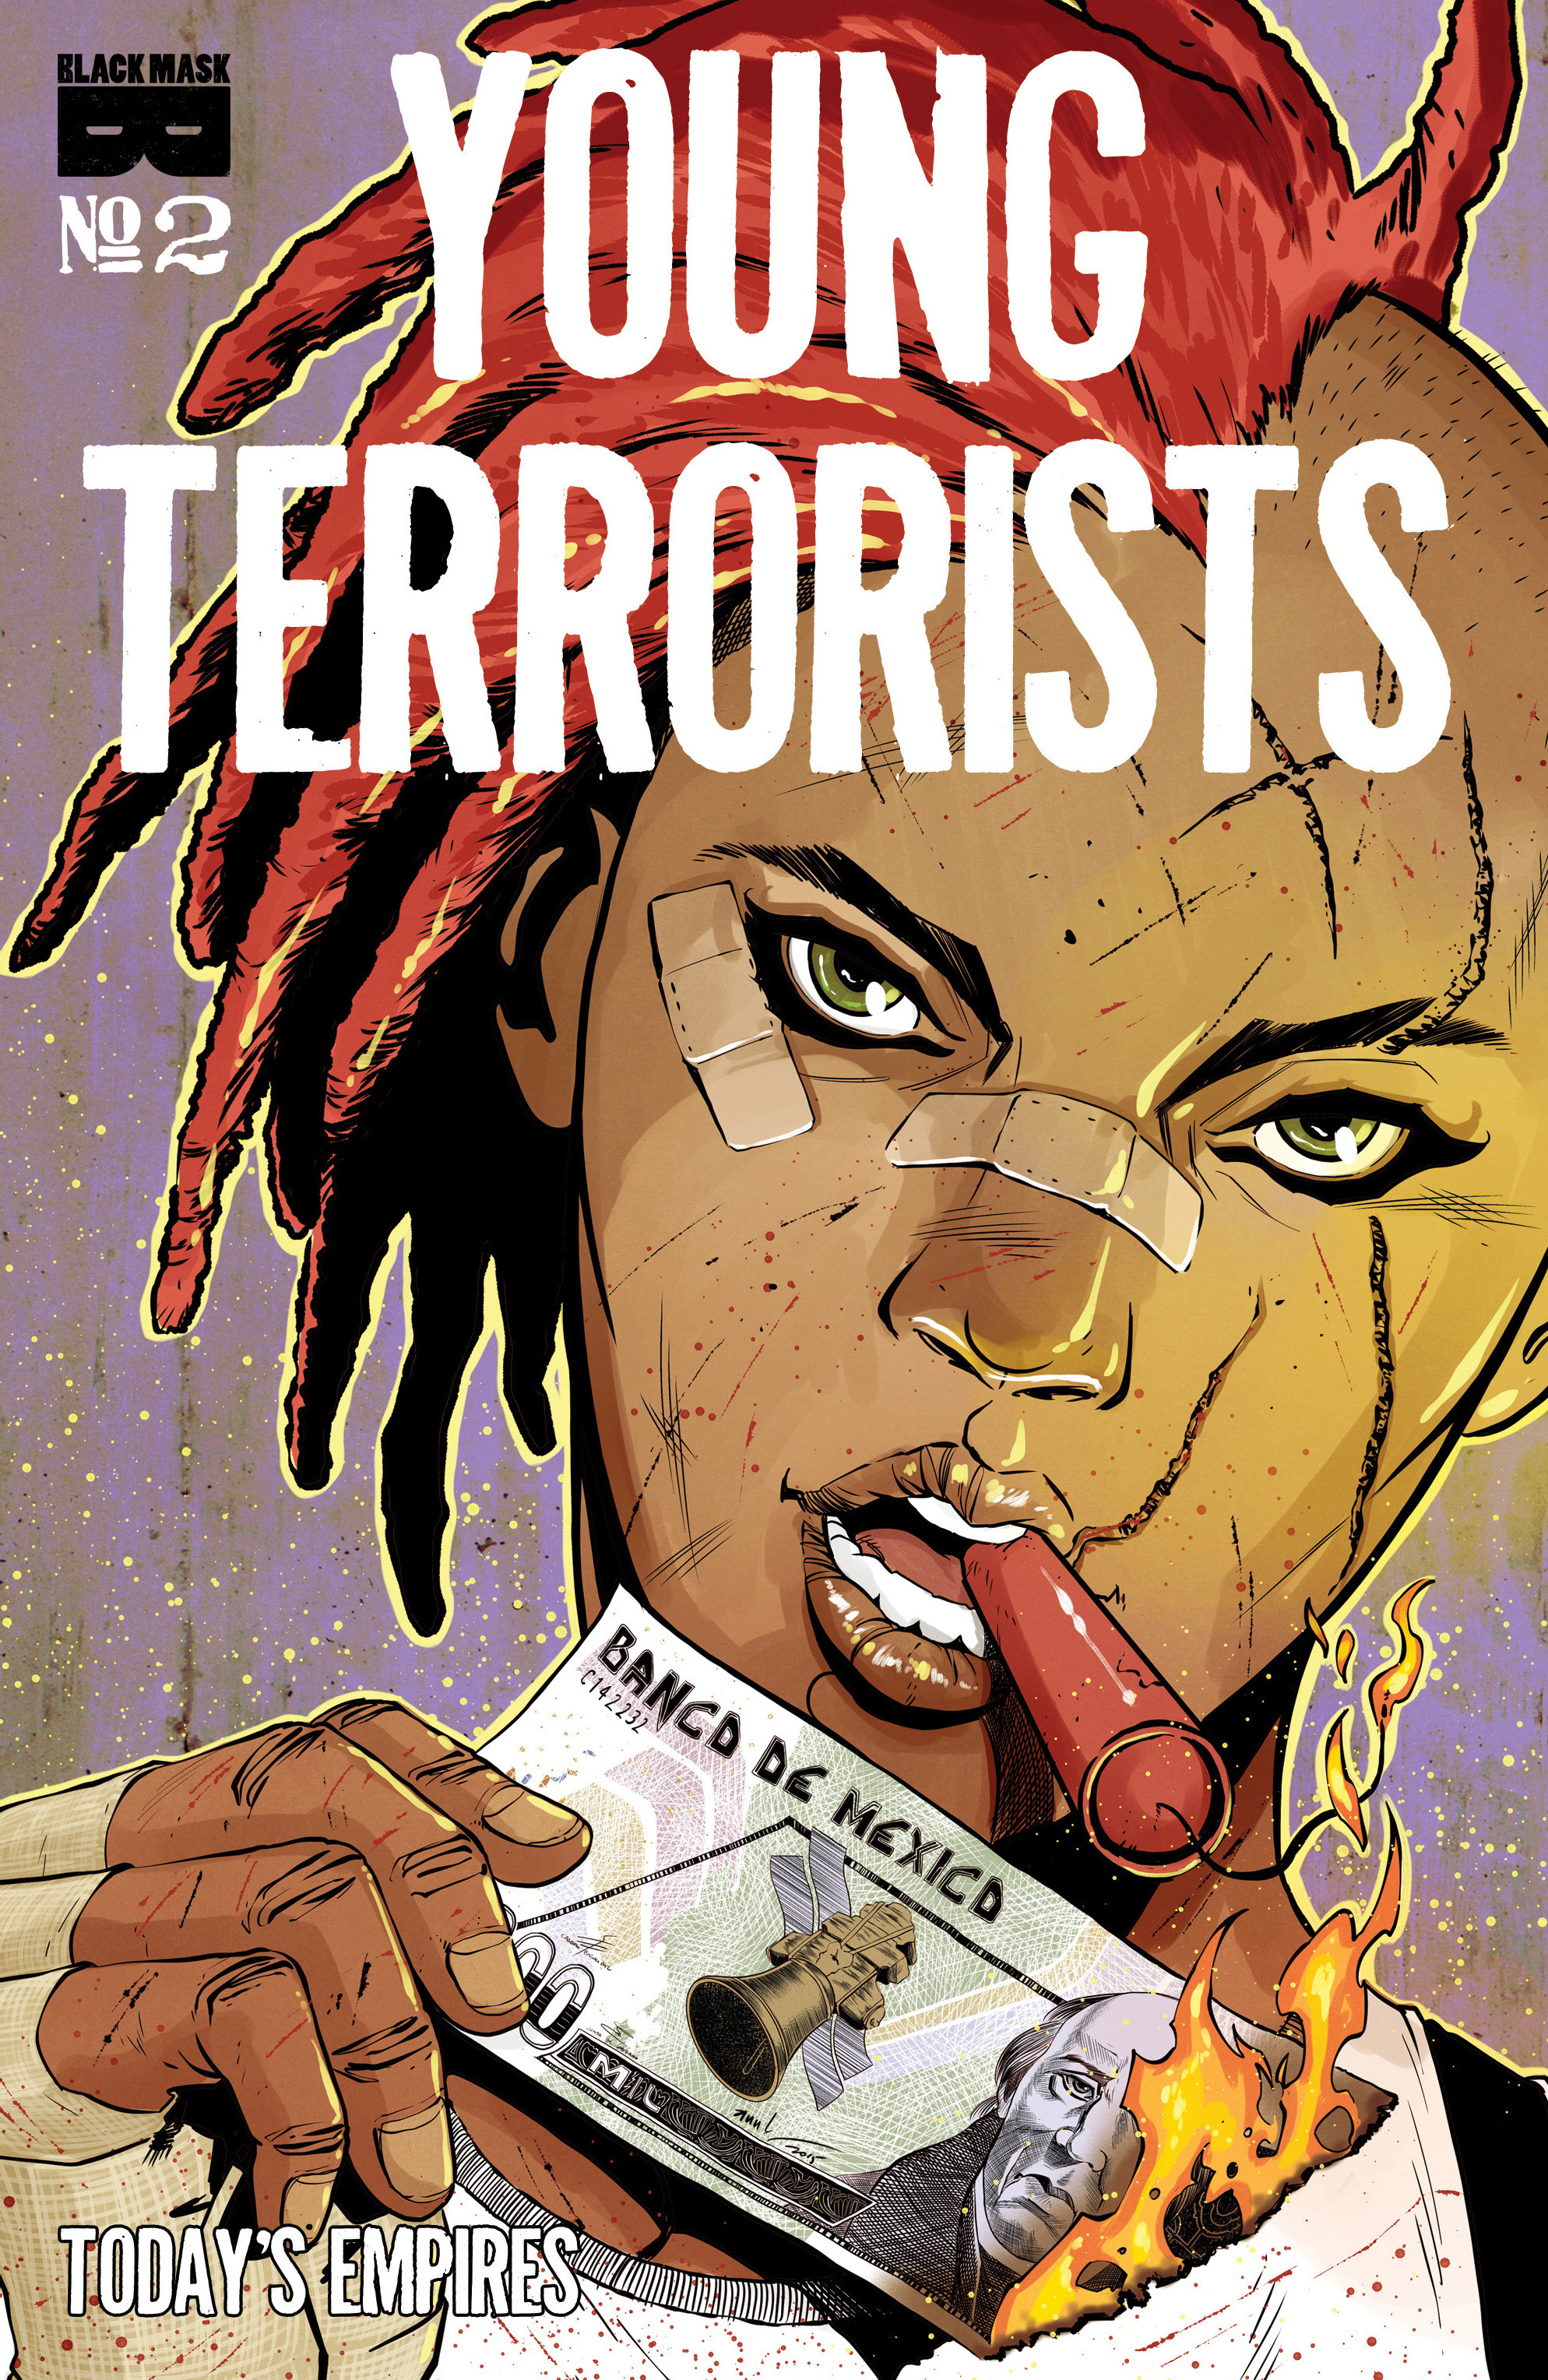 Read online Young Terrorists comic -  Issue #2 - 1